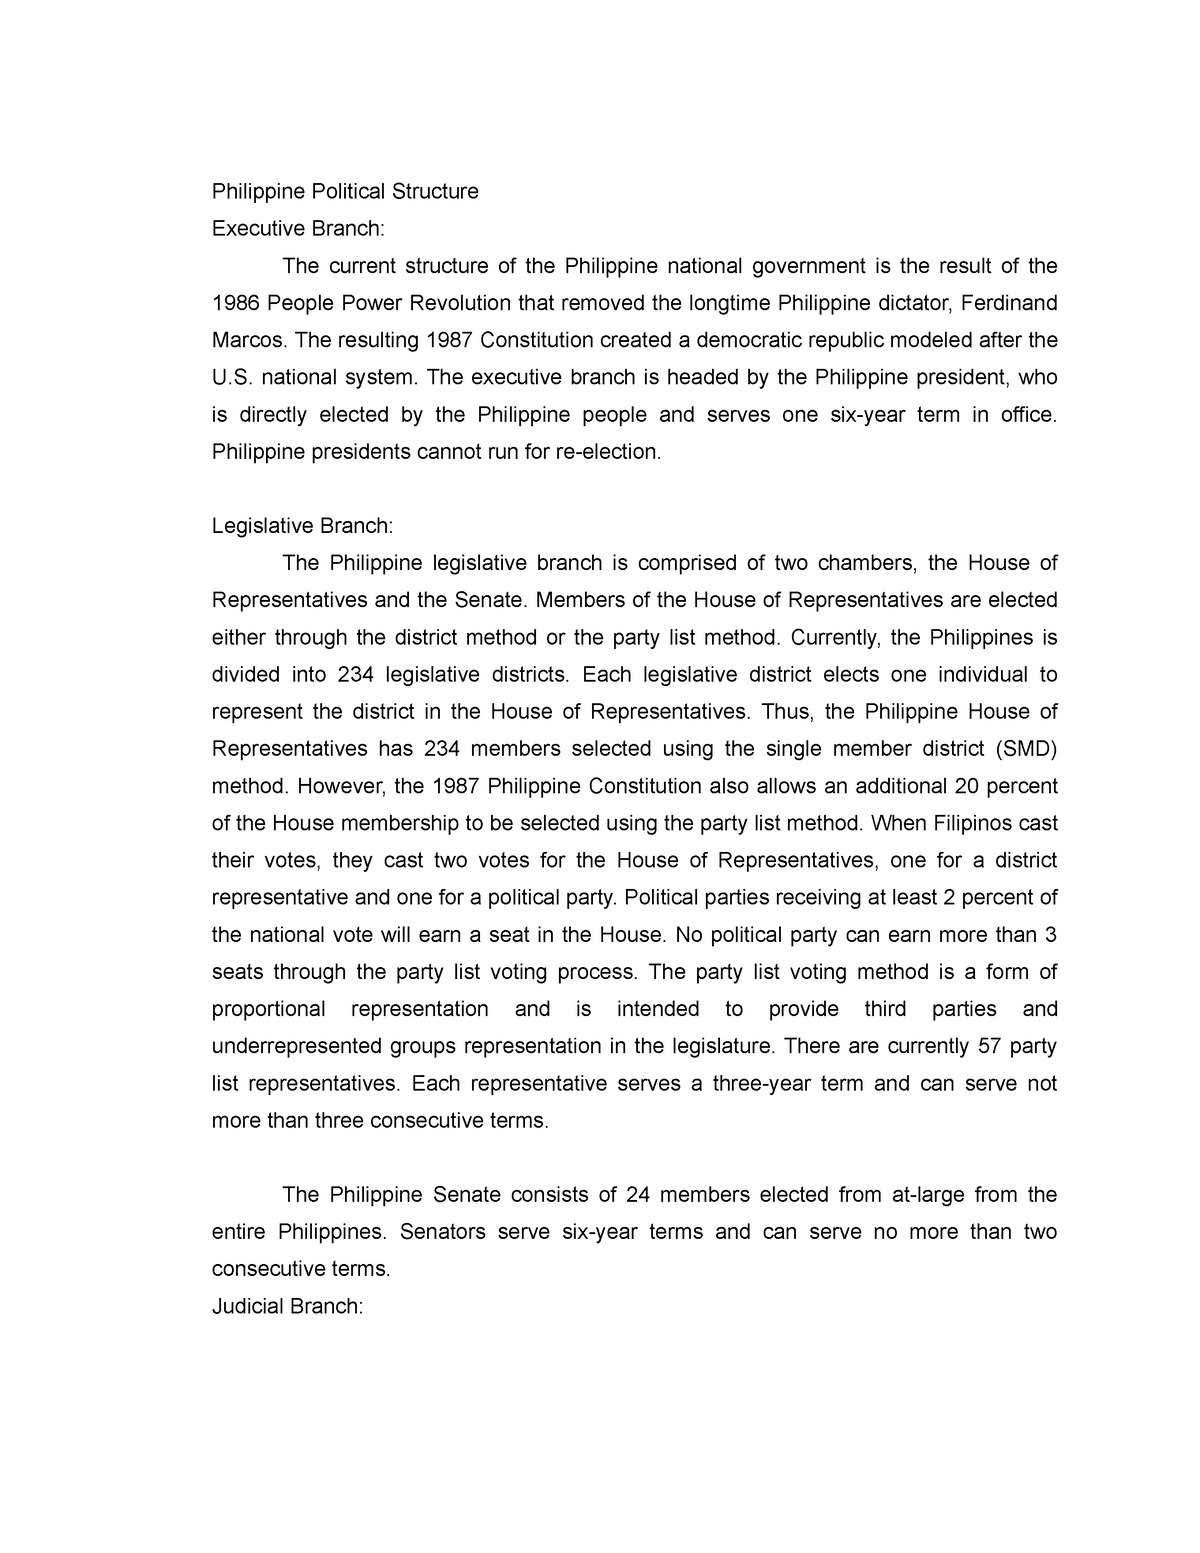 2 paragraph essay about the philippine political structure